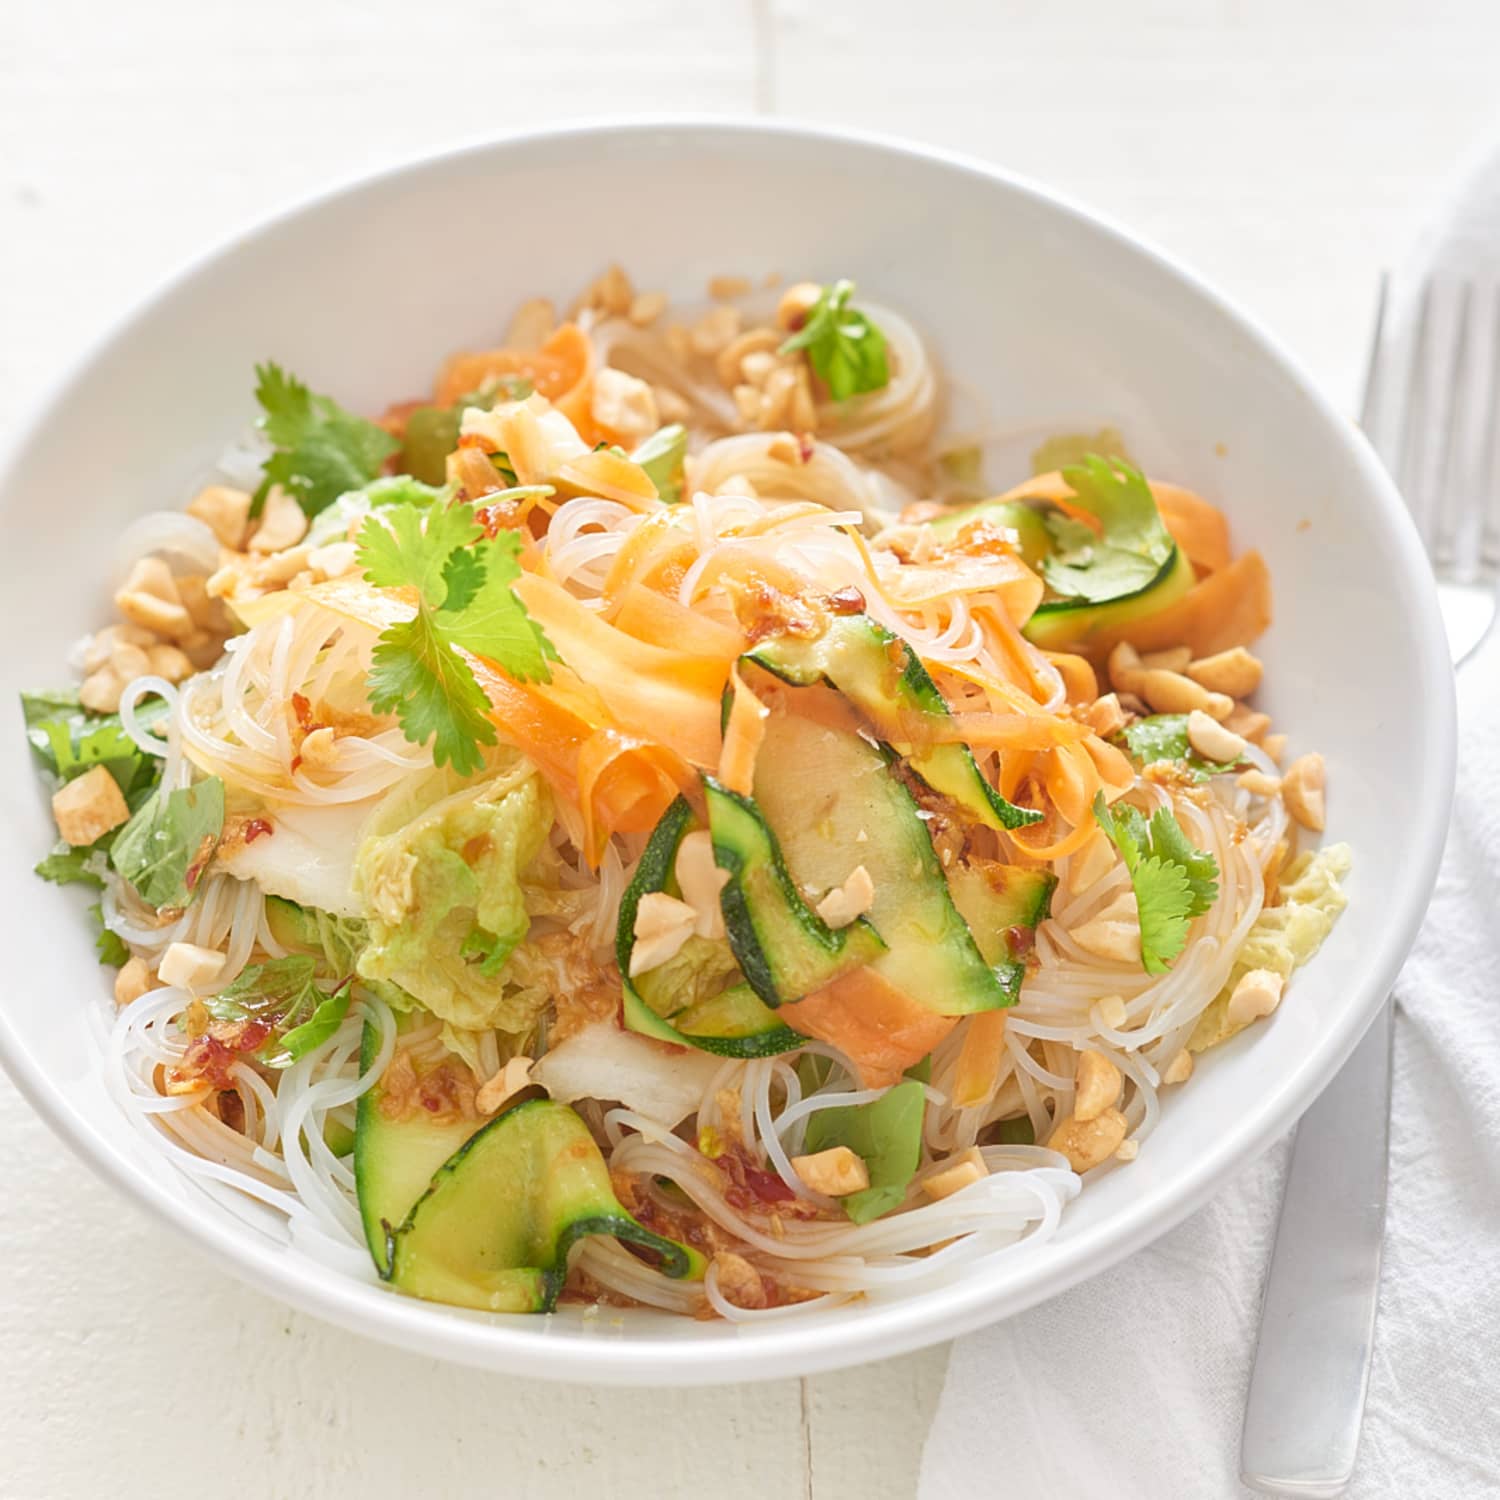 Spiralized Vegetable Noodle Bowls With Peanut Sauce - Domestic Gothess